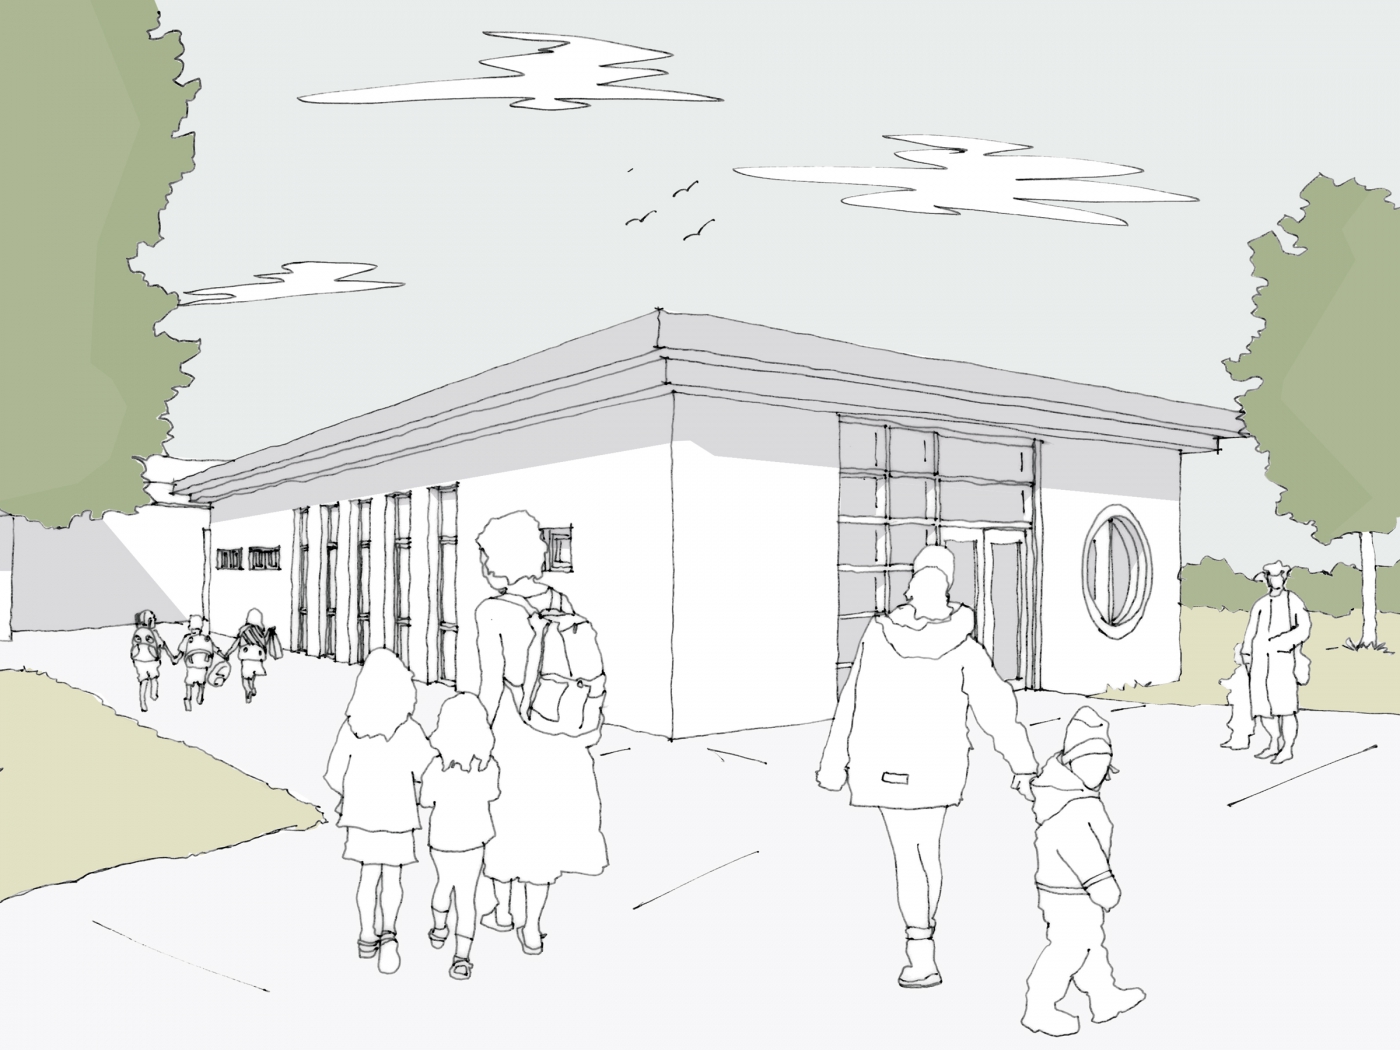 New Delaval Primary School Extension gains planning approval